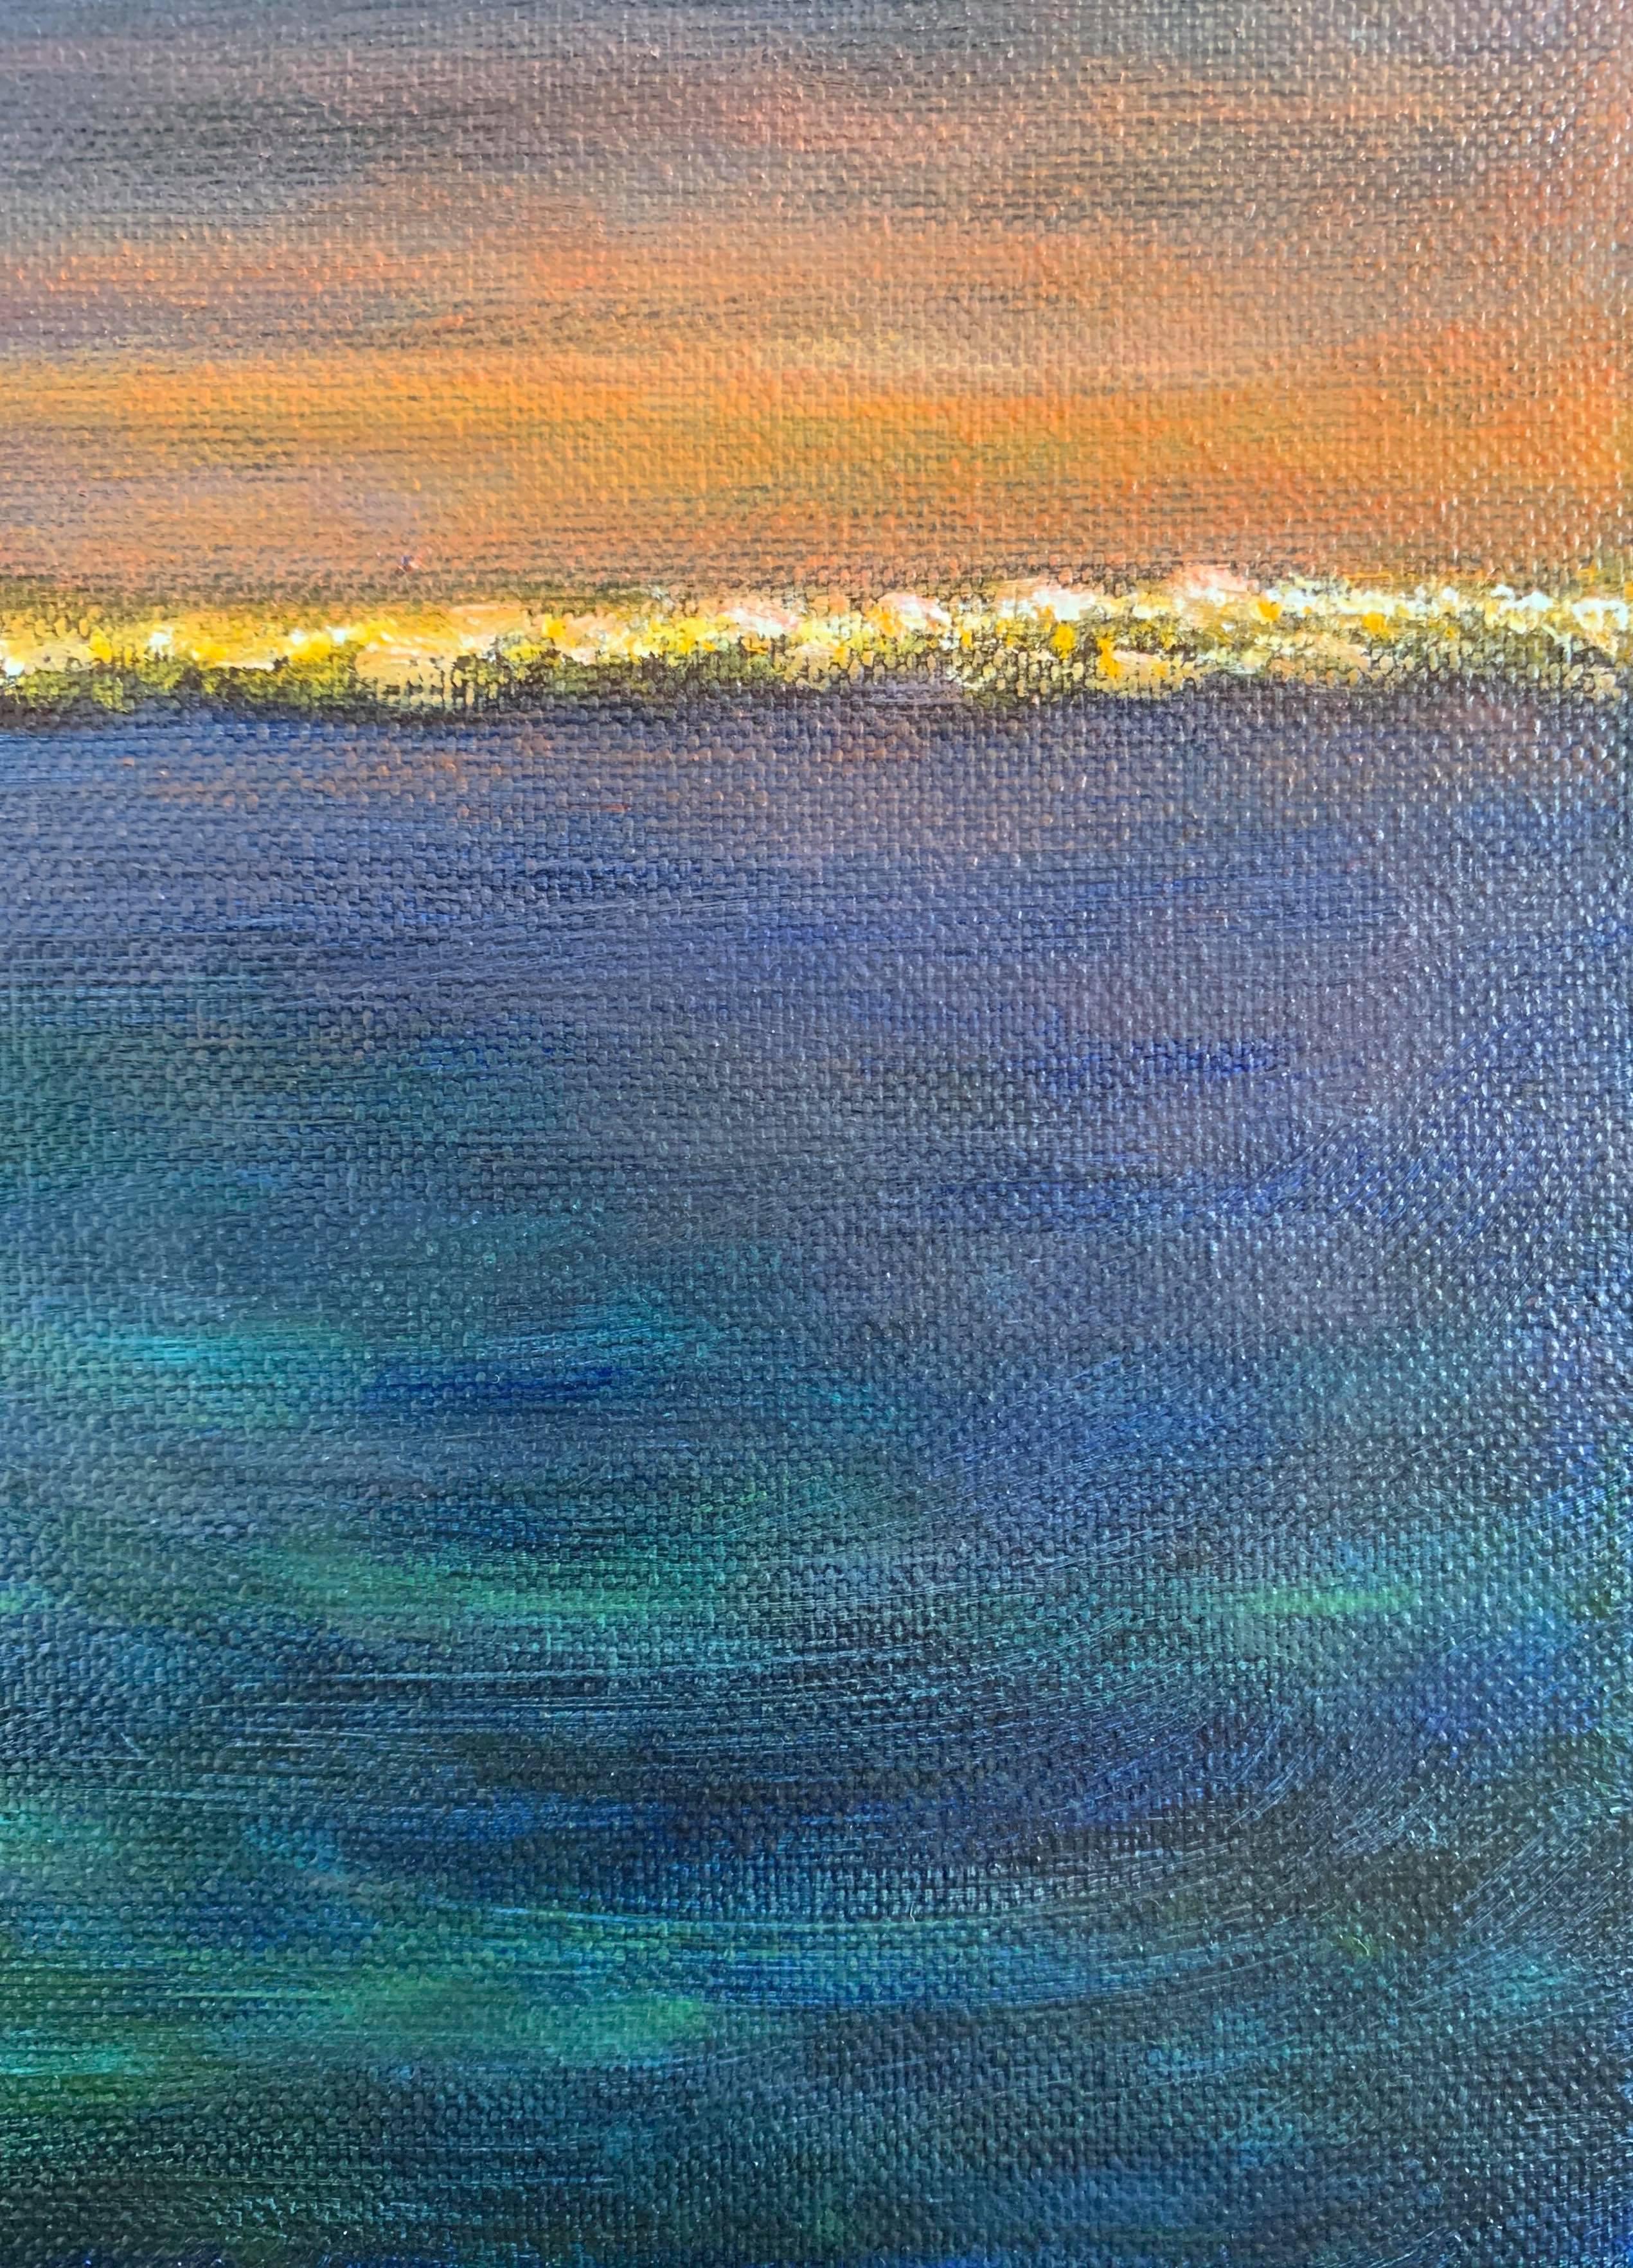 In this oil on canvas painting, the horizon shows where the breaking waves and sunset appear to meet. A small strip of land appears most noticeably on the left, darker than the shimmering horizon. The painting has cerulean, ultramarine, and